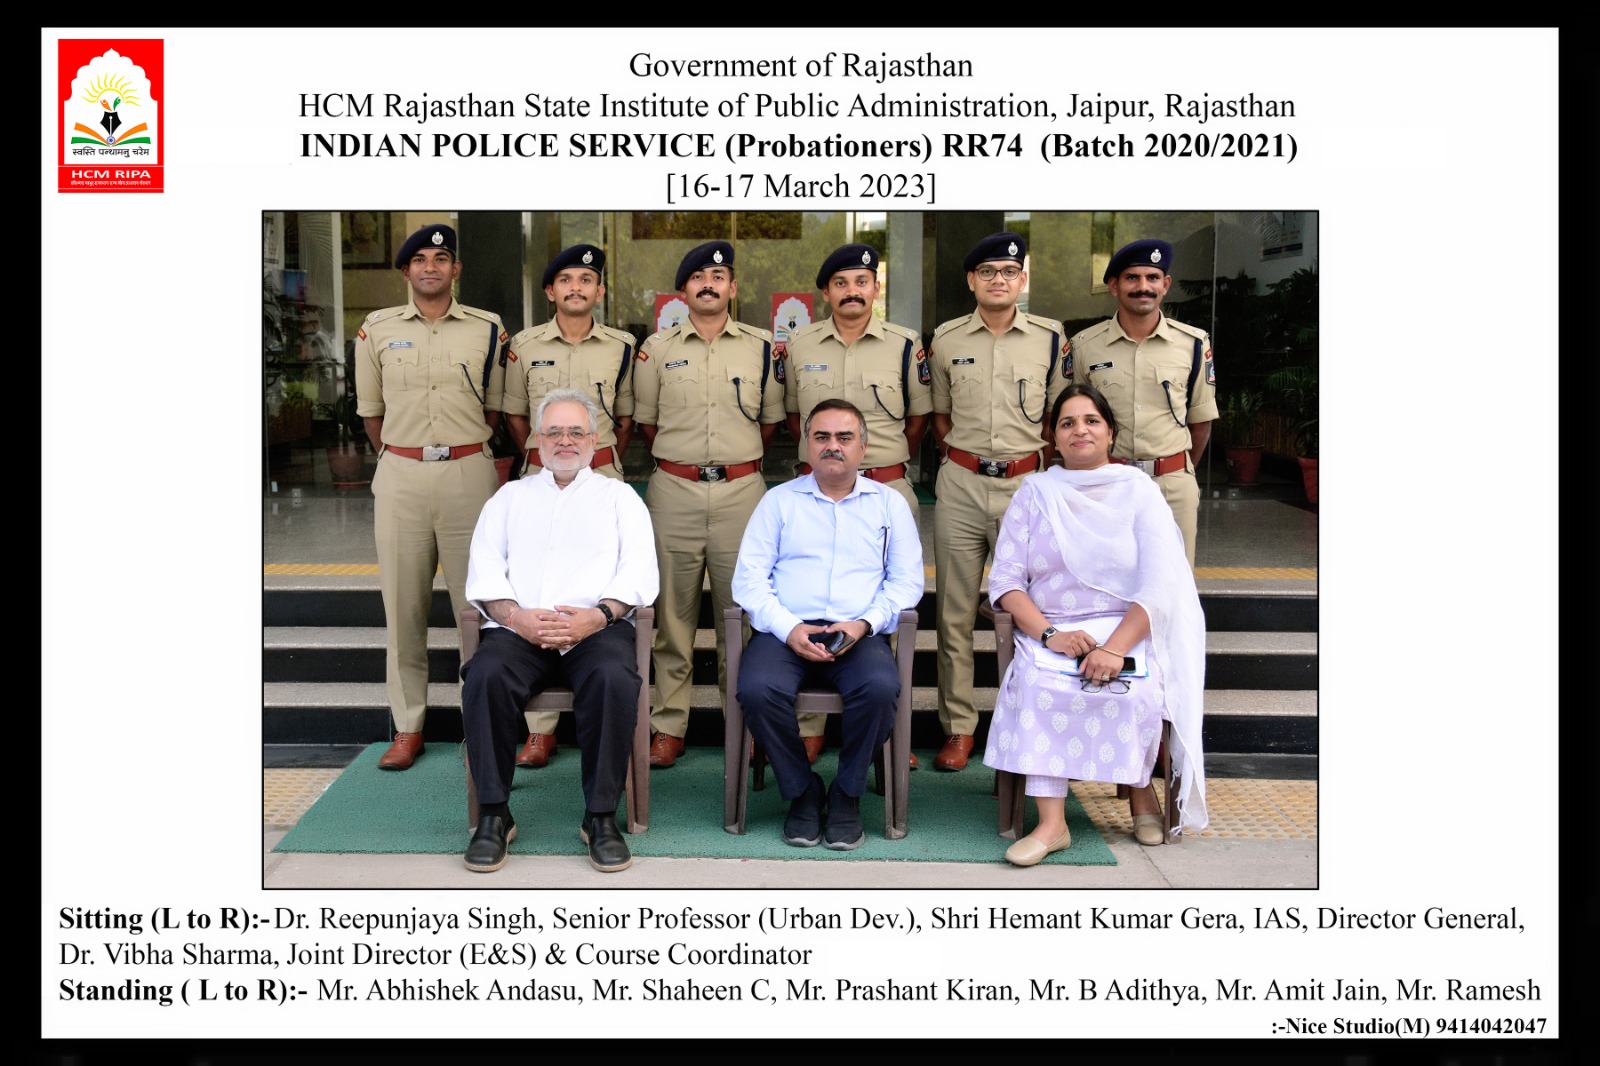 Training programme for IPS Probationers